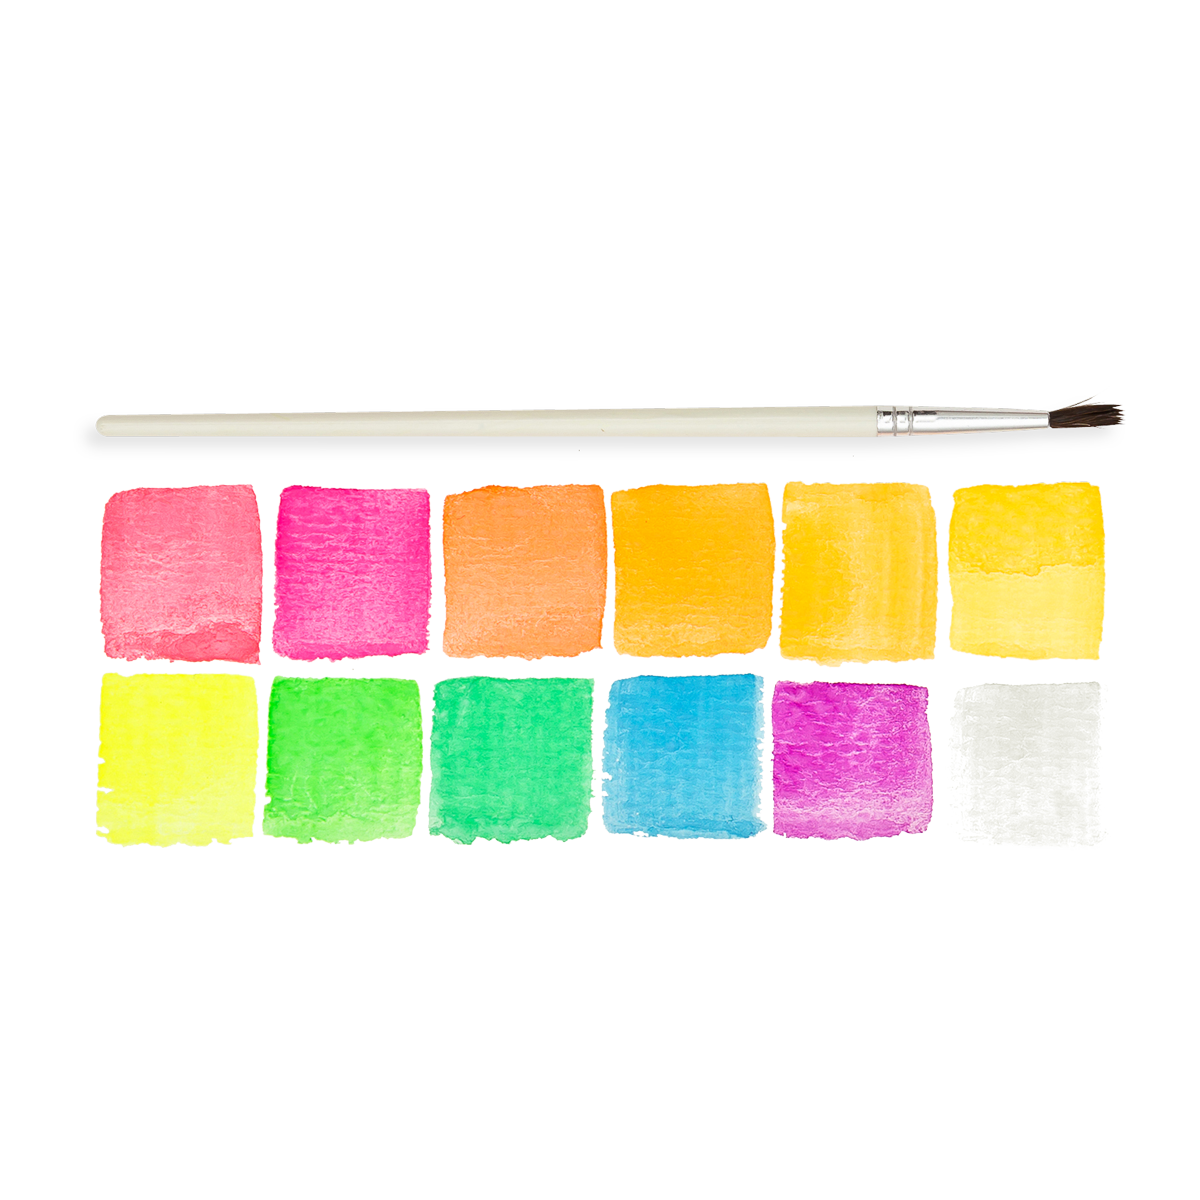 OOLY Chroma Blends Watercolor Paint Set - Neon Watercolor Sets